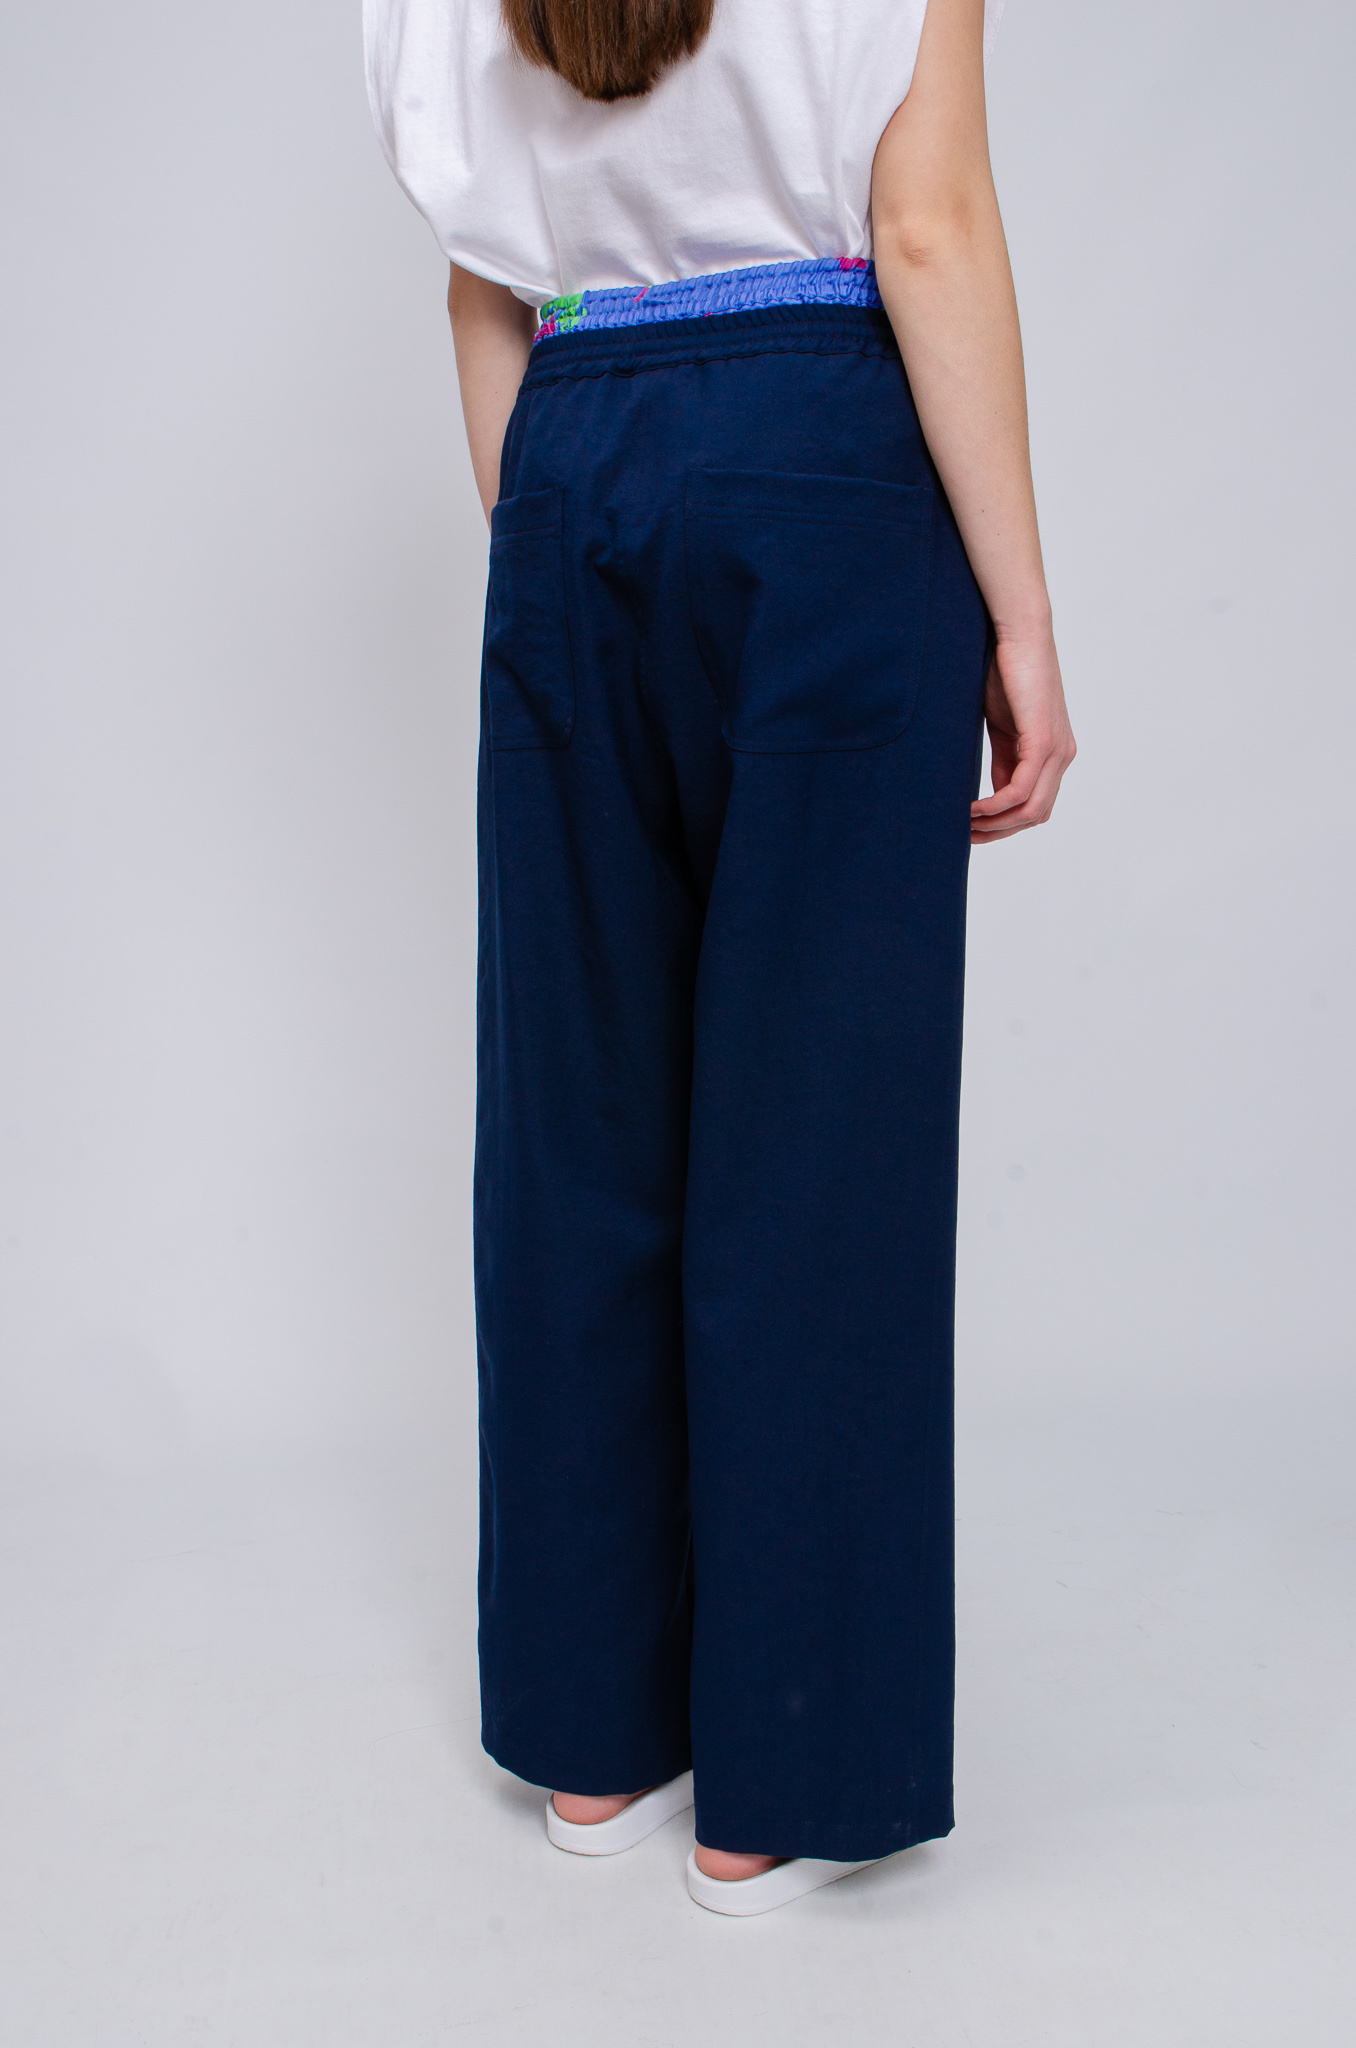 TRUNK LAYERED LOOK PANTS IN NAVY-4